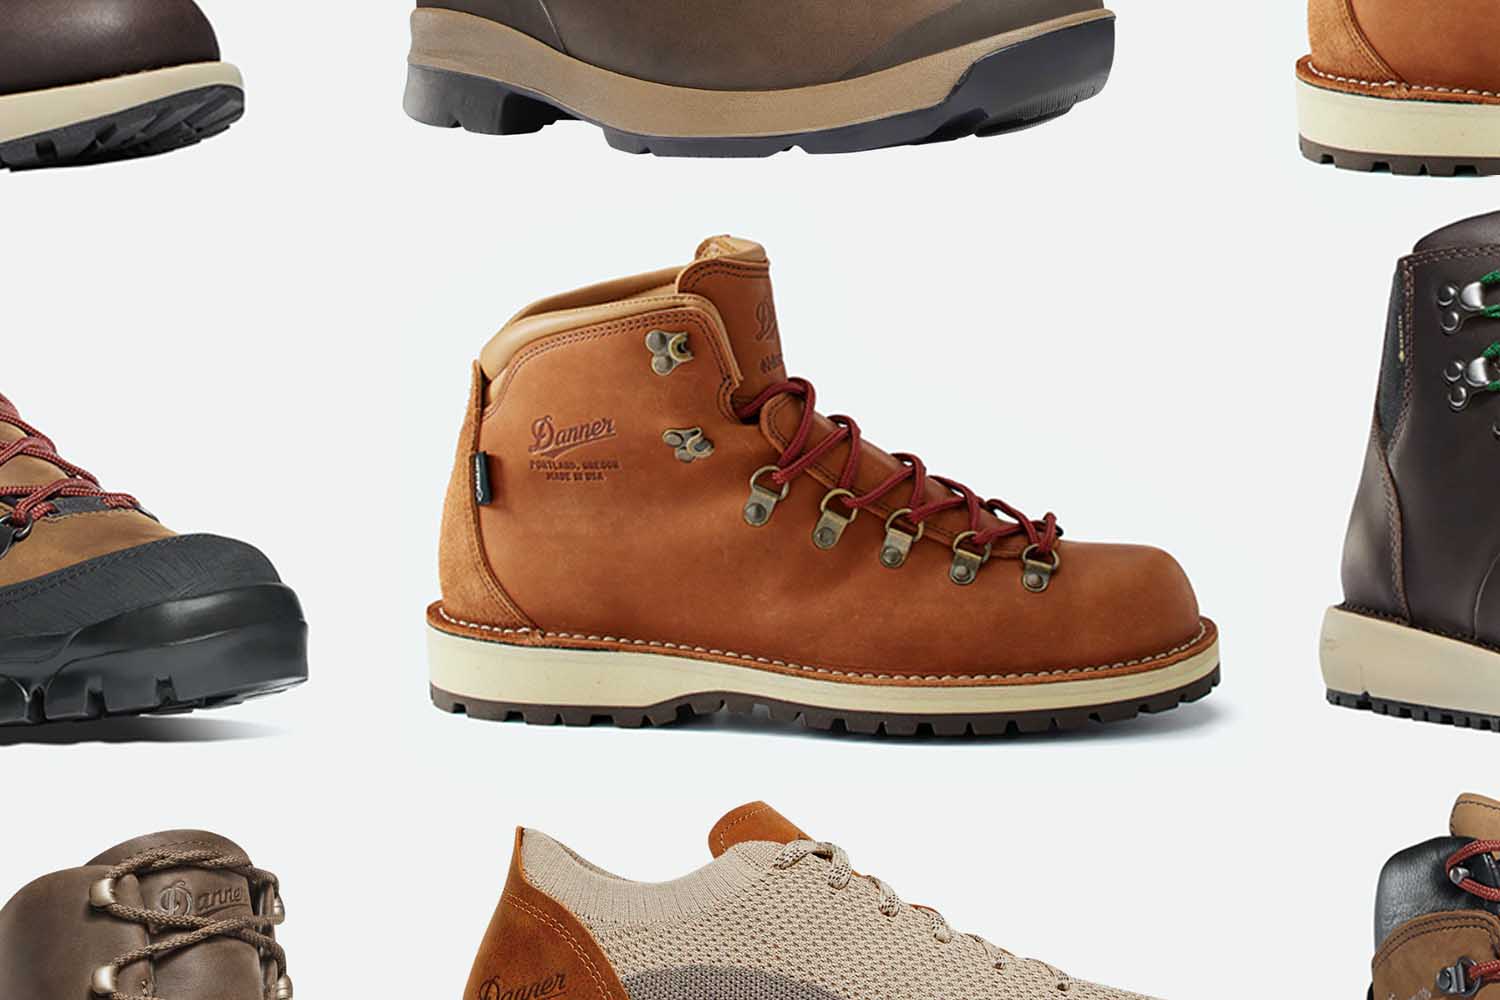 Save Up to 25% On Adventure-Ready Danner Hiking Boots